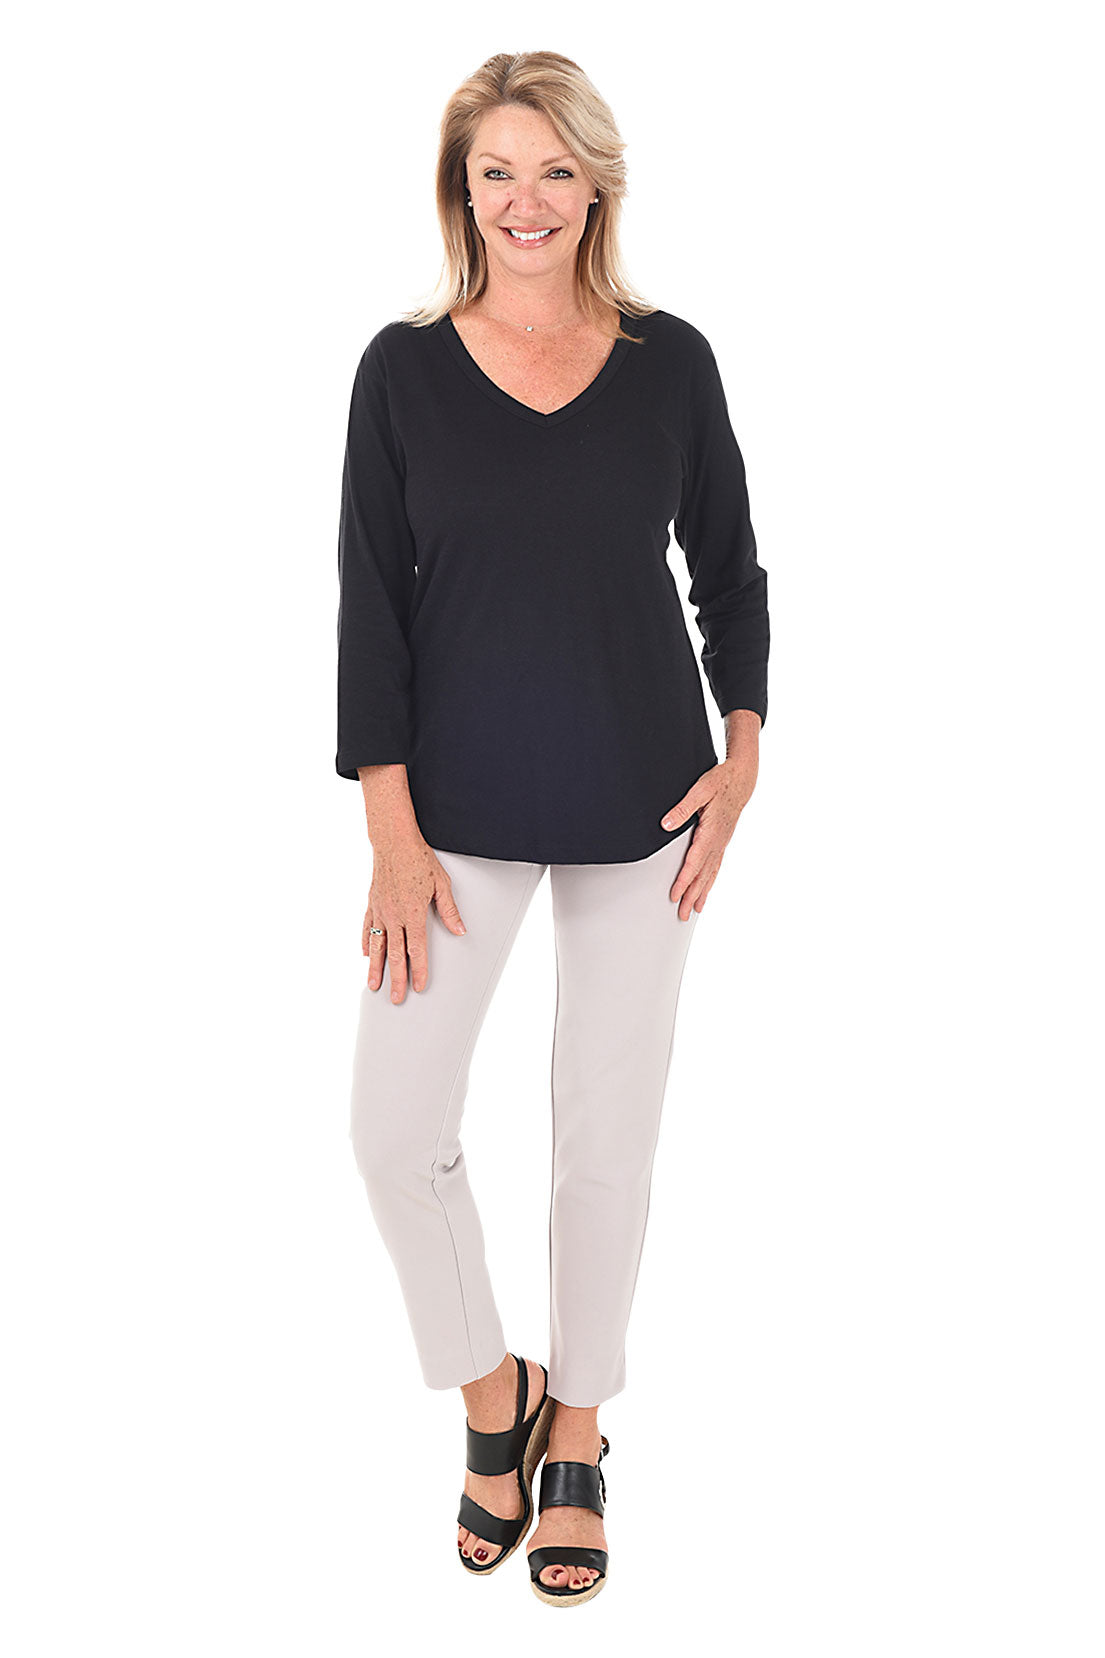 Anthony's Clothing & Resort Wear for Women over 50